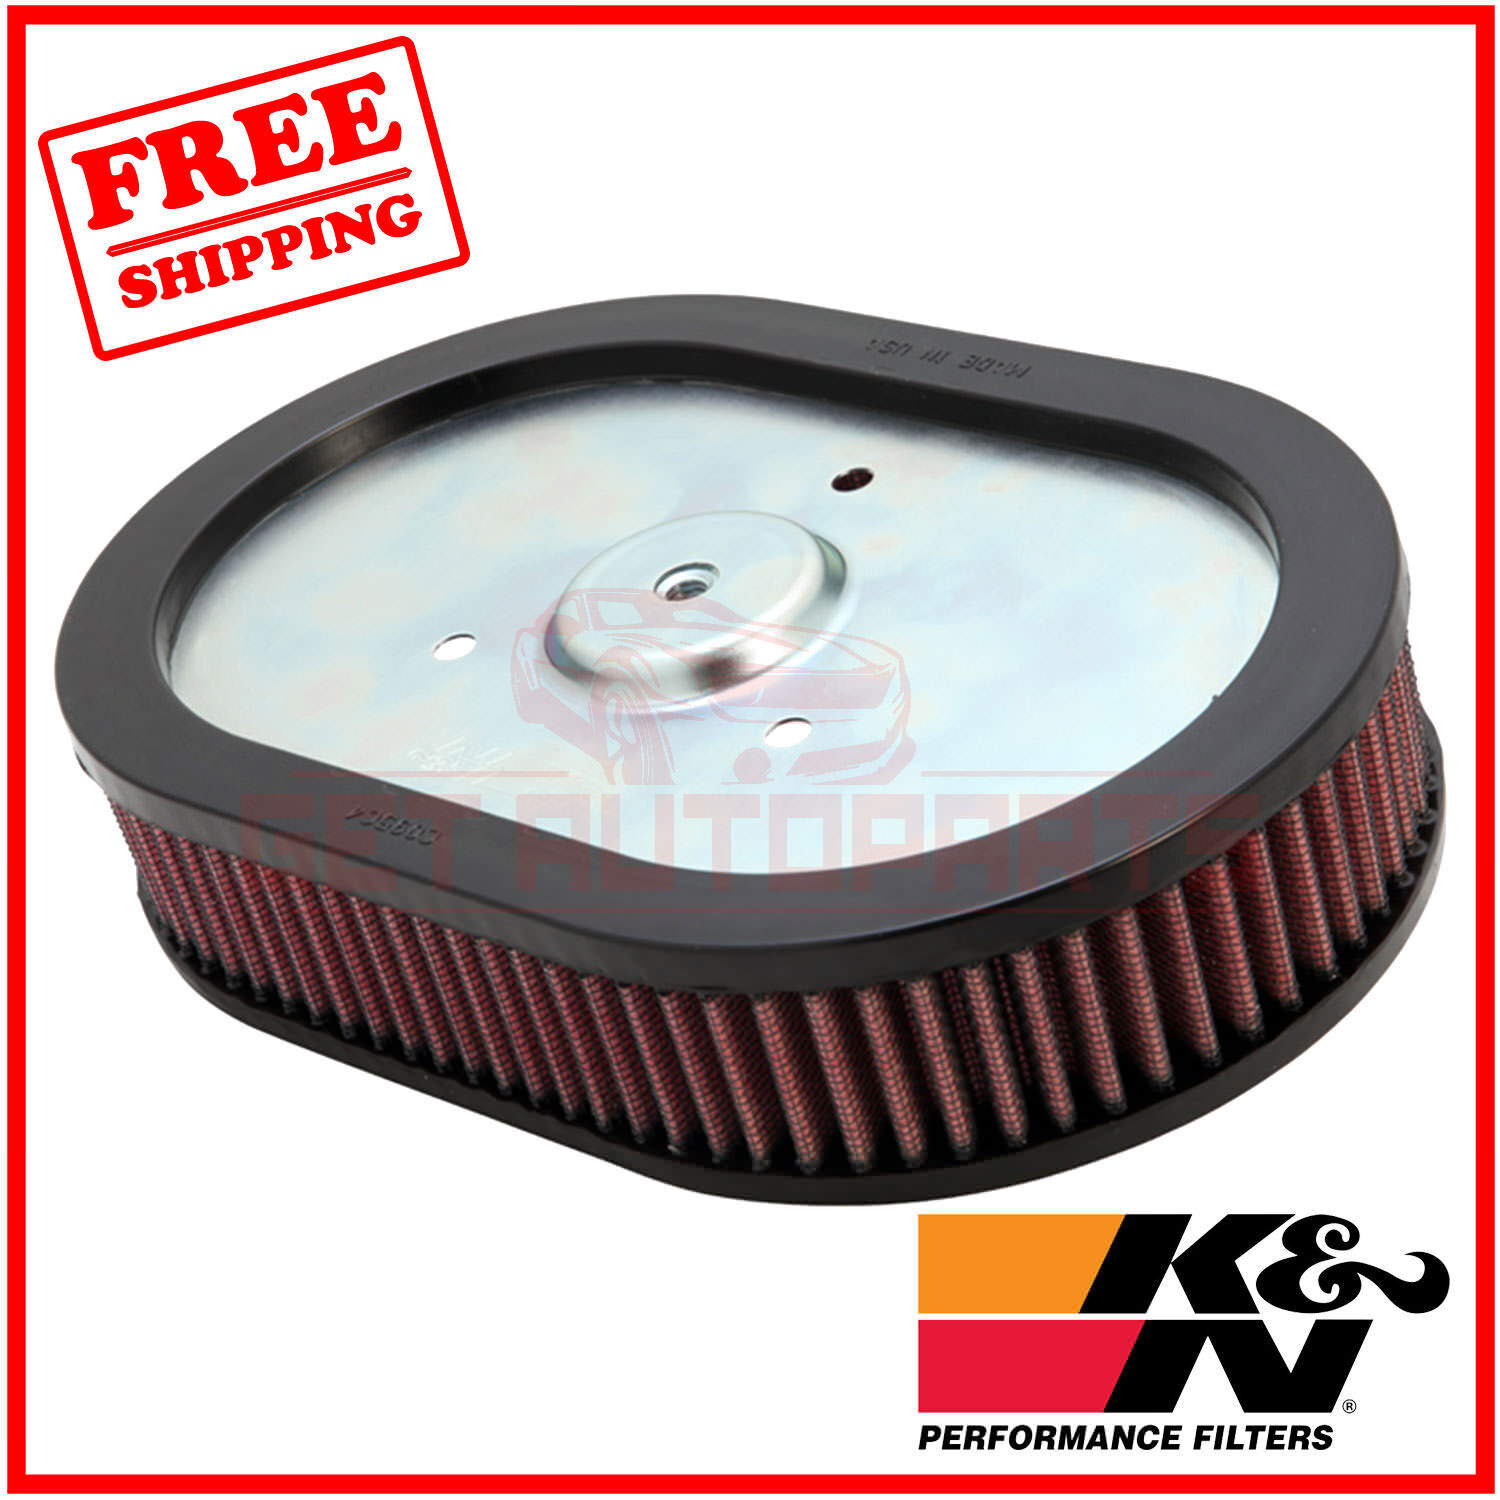 K&N Replacement Air Filter for Harley Davidson FXDWG Dyna Wide Glide 2016-2017